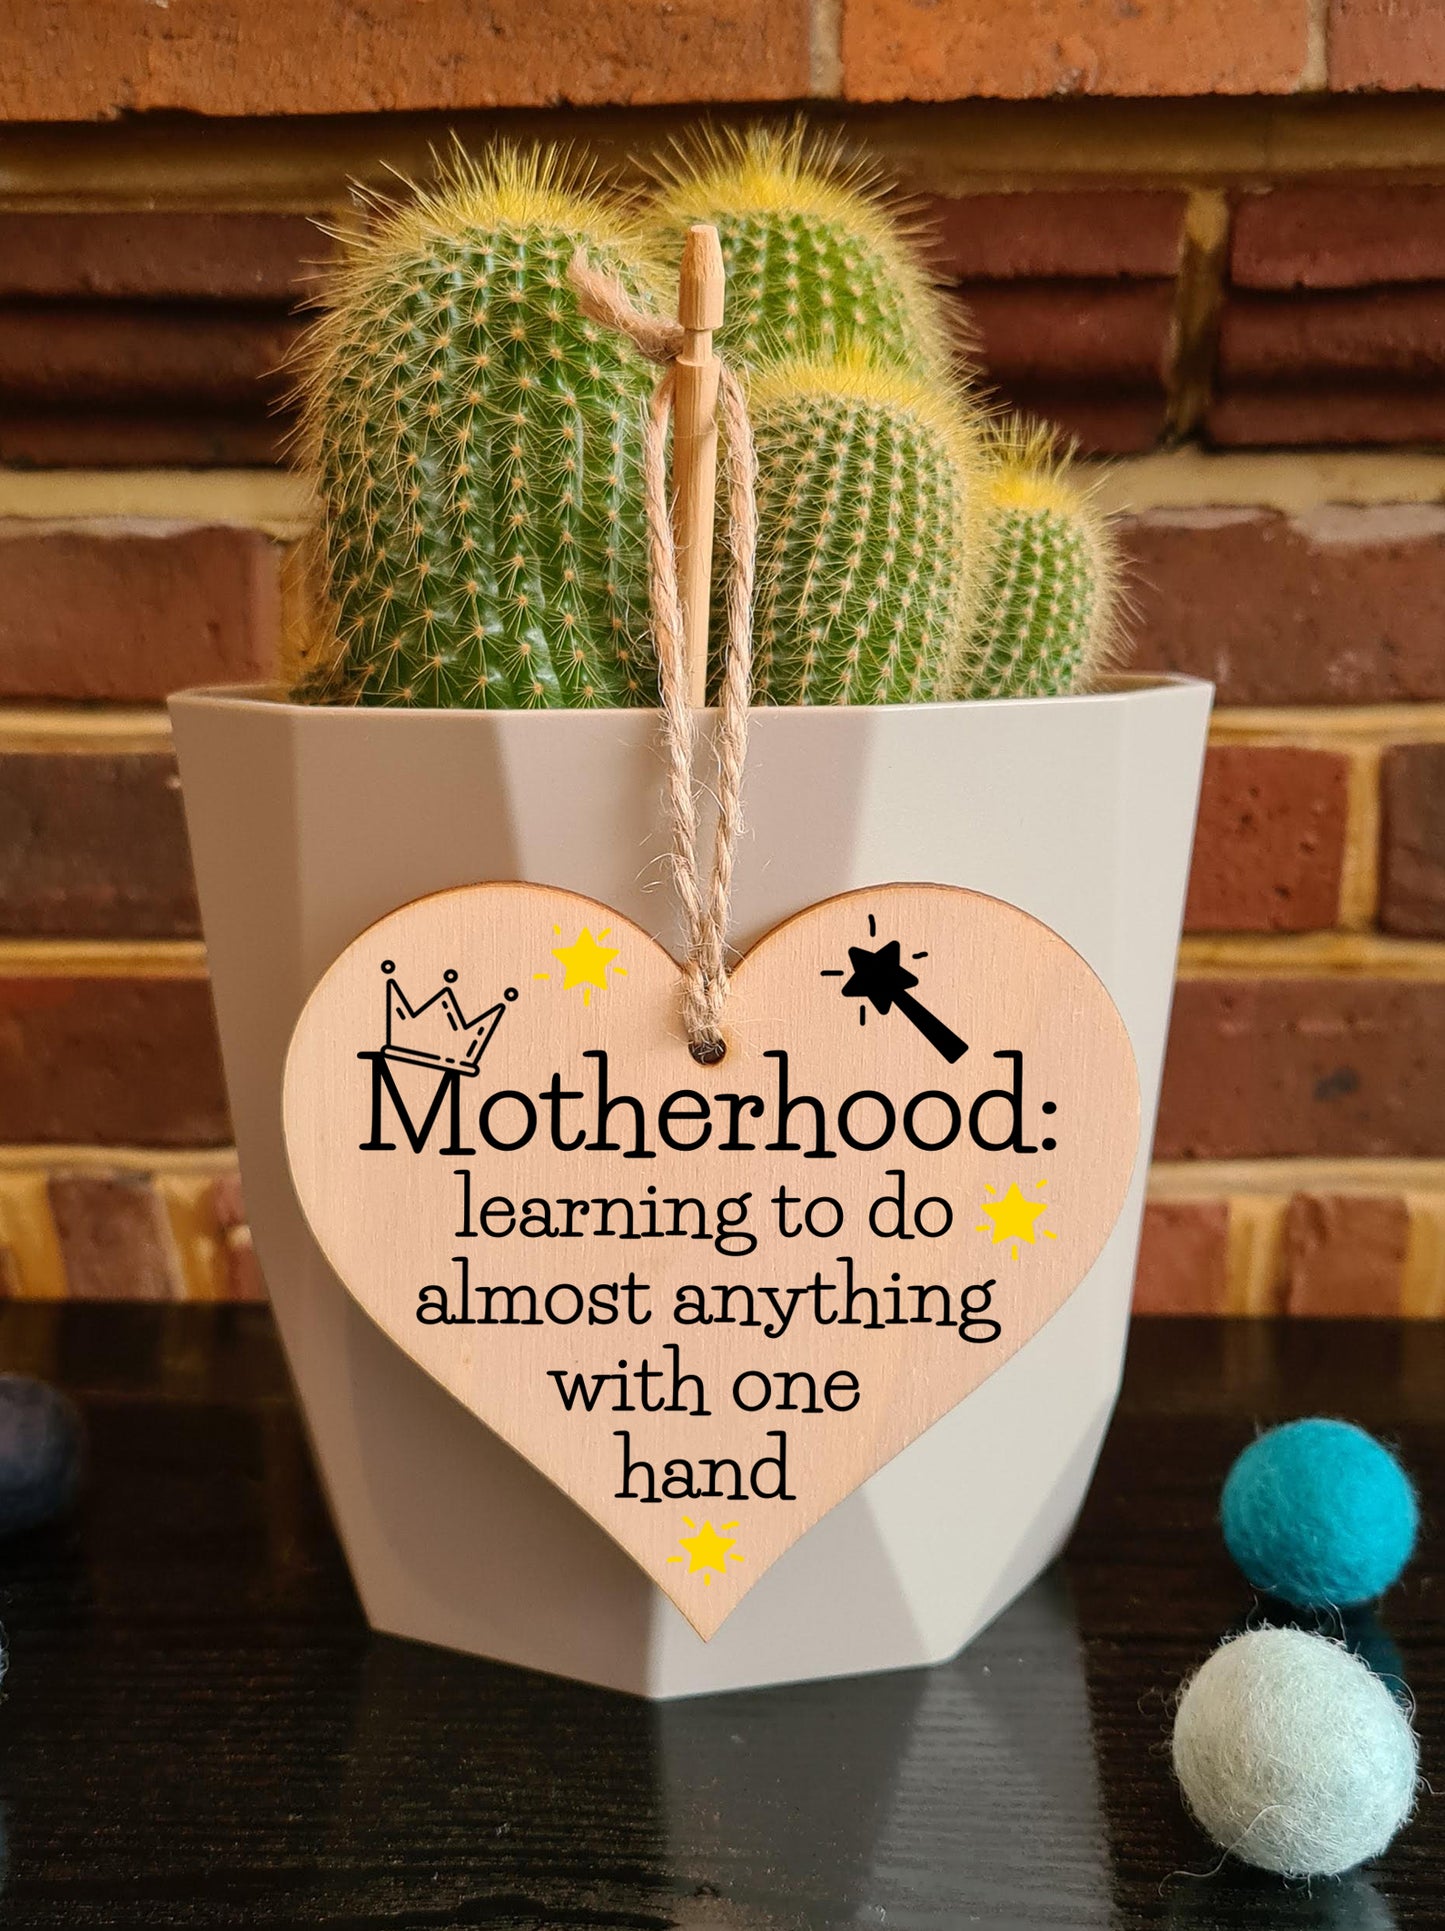 Handmade Wooden Hanging Heart Plaque Gift for Mum Funny Gift about Motherhood